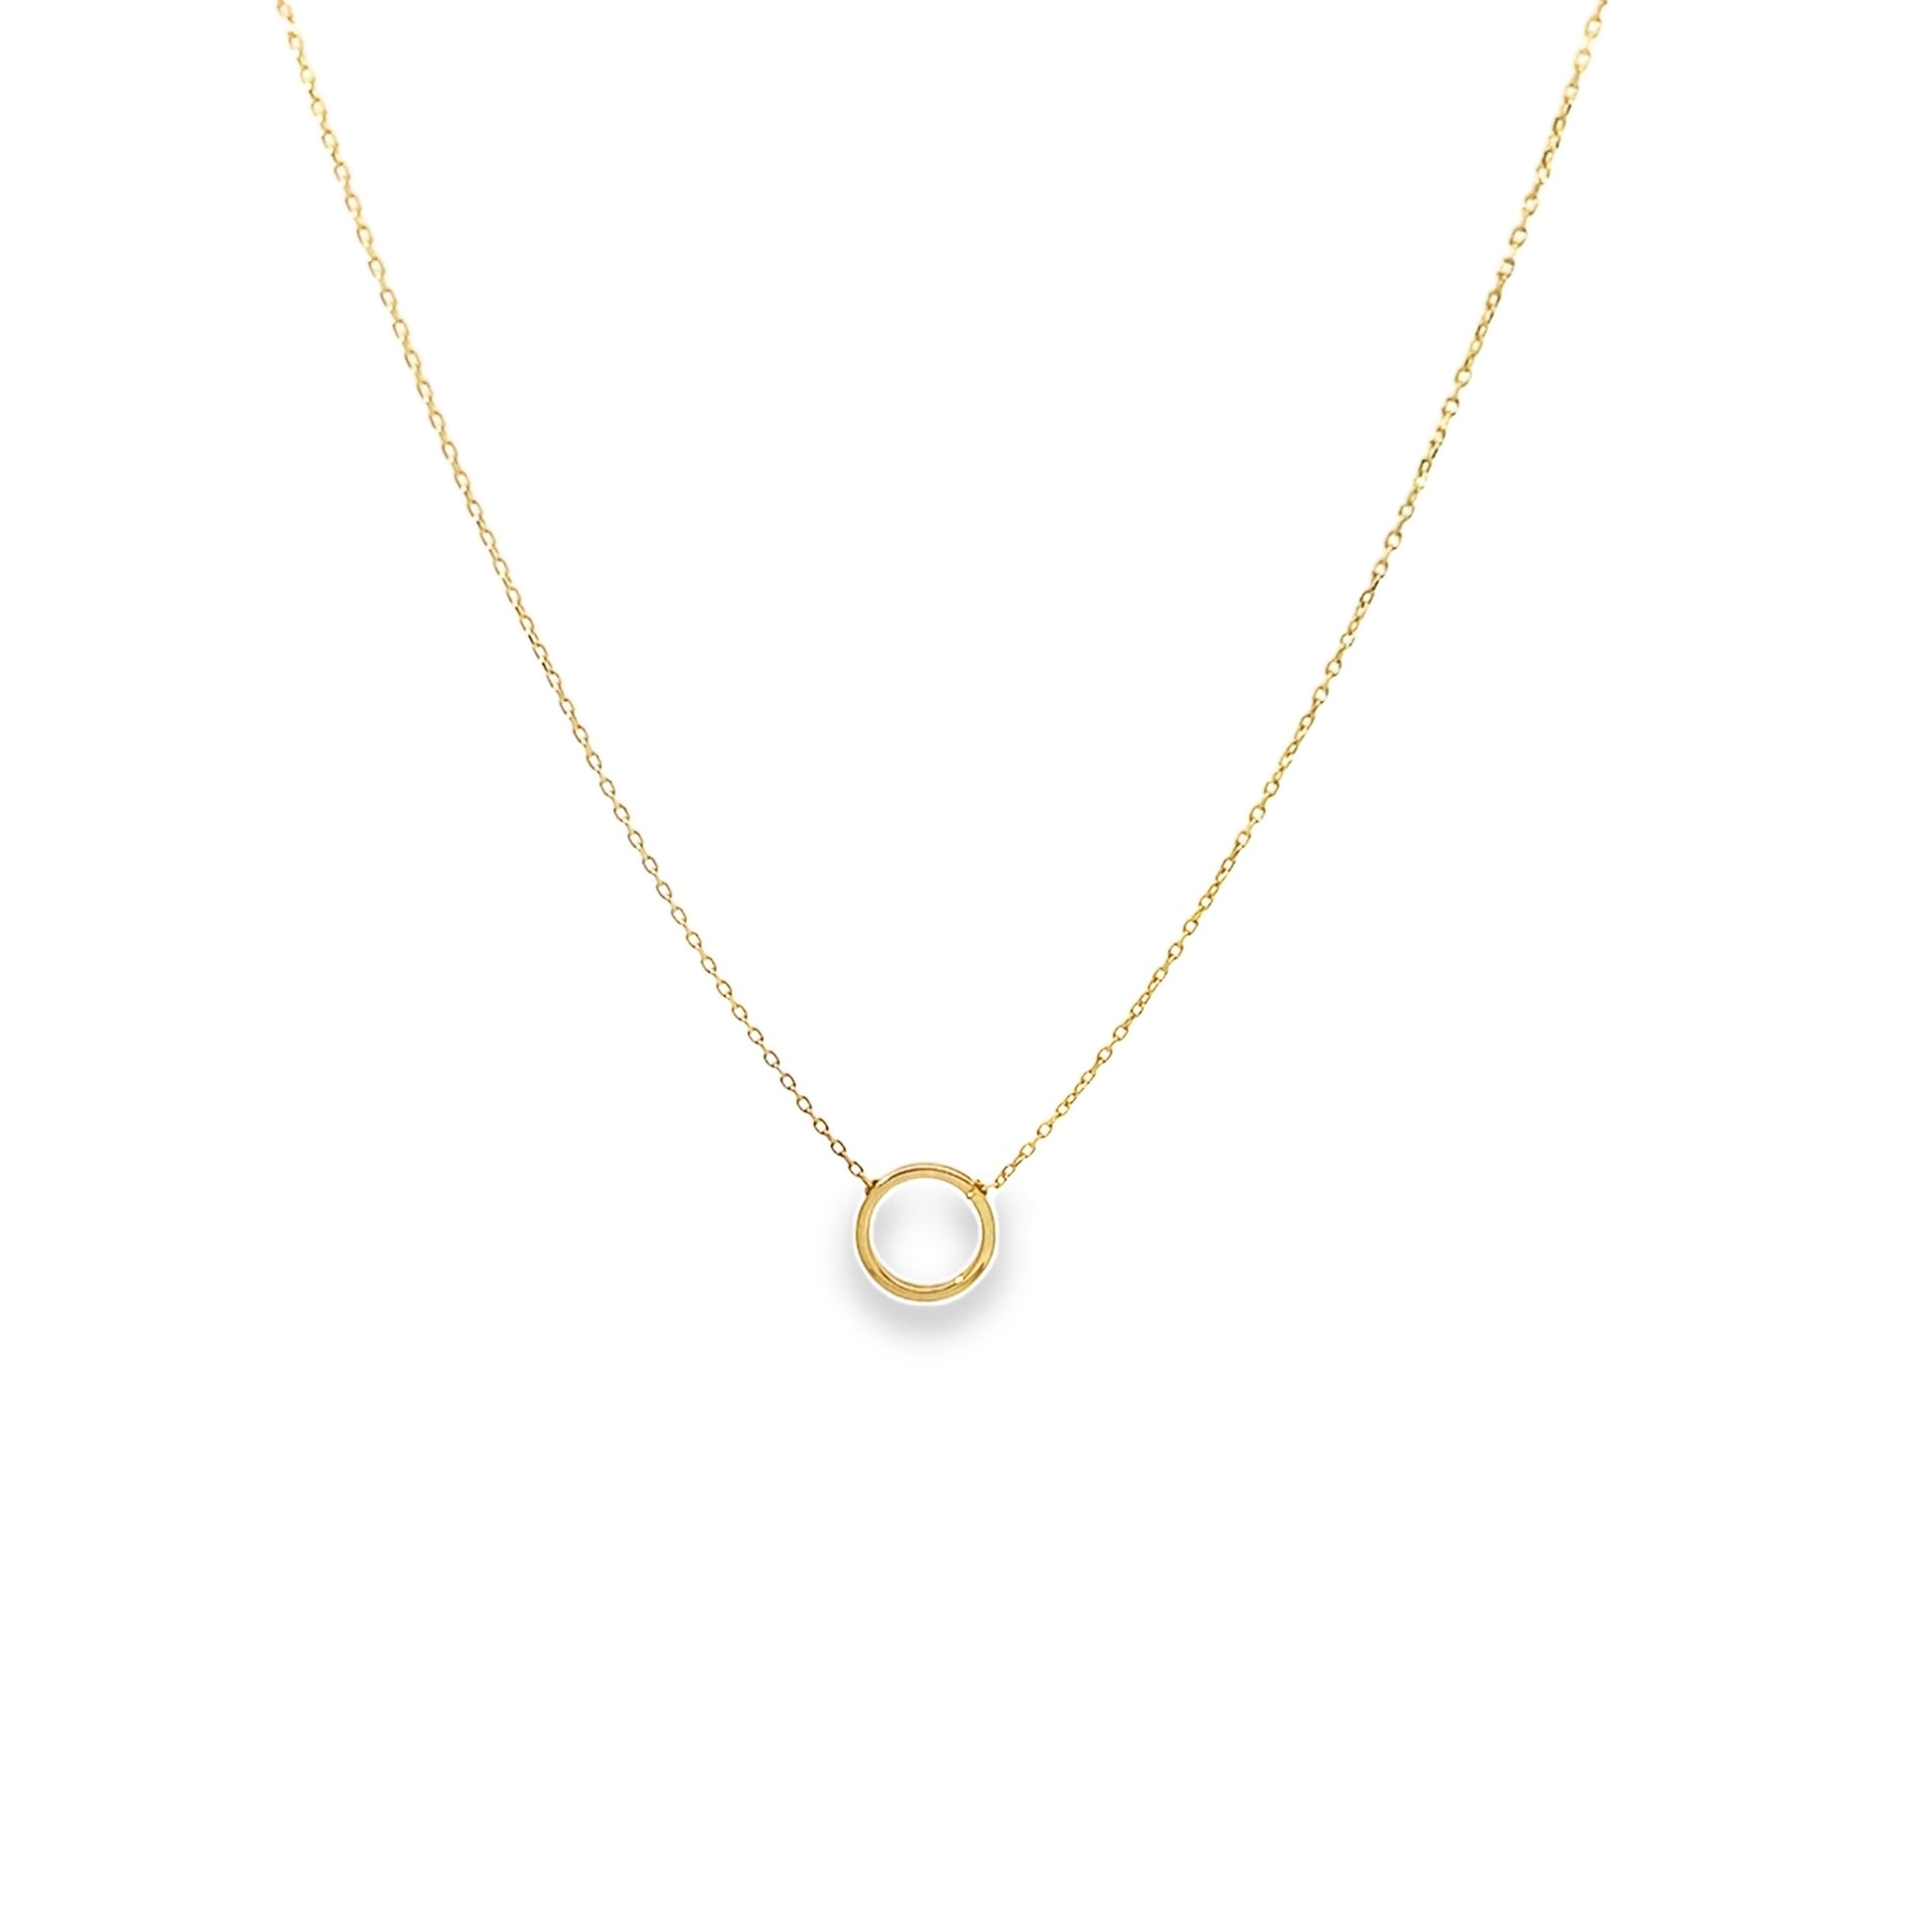 14K Yellow Gold Circle Necklace 18In 0.5Dwt